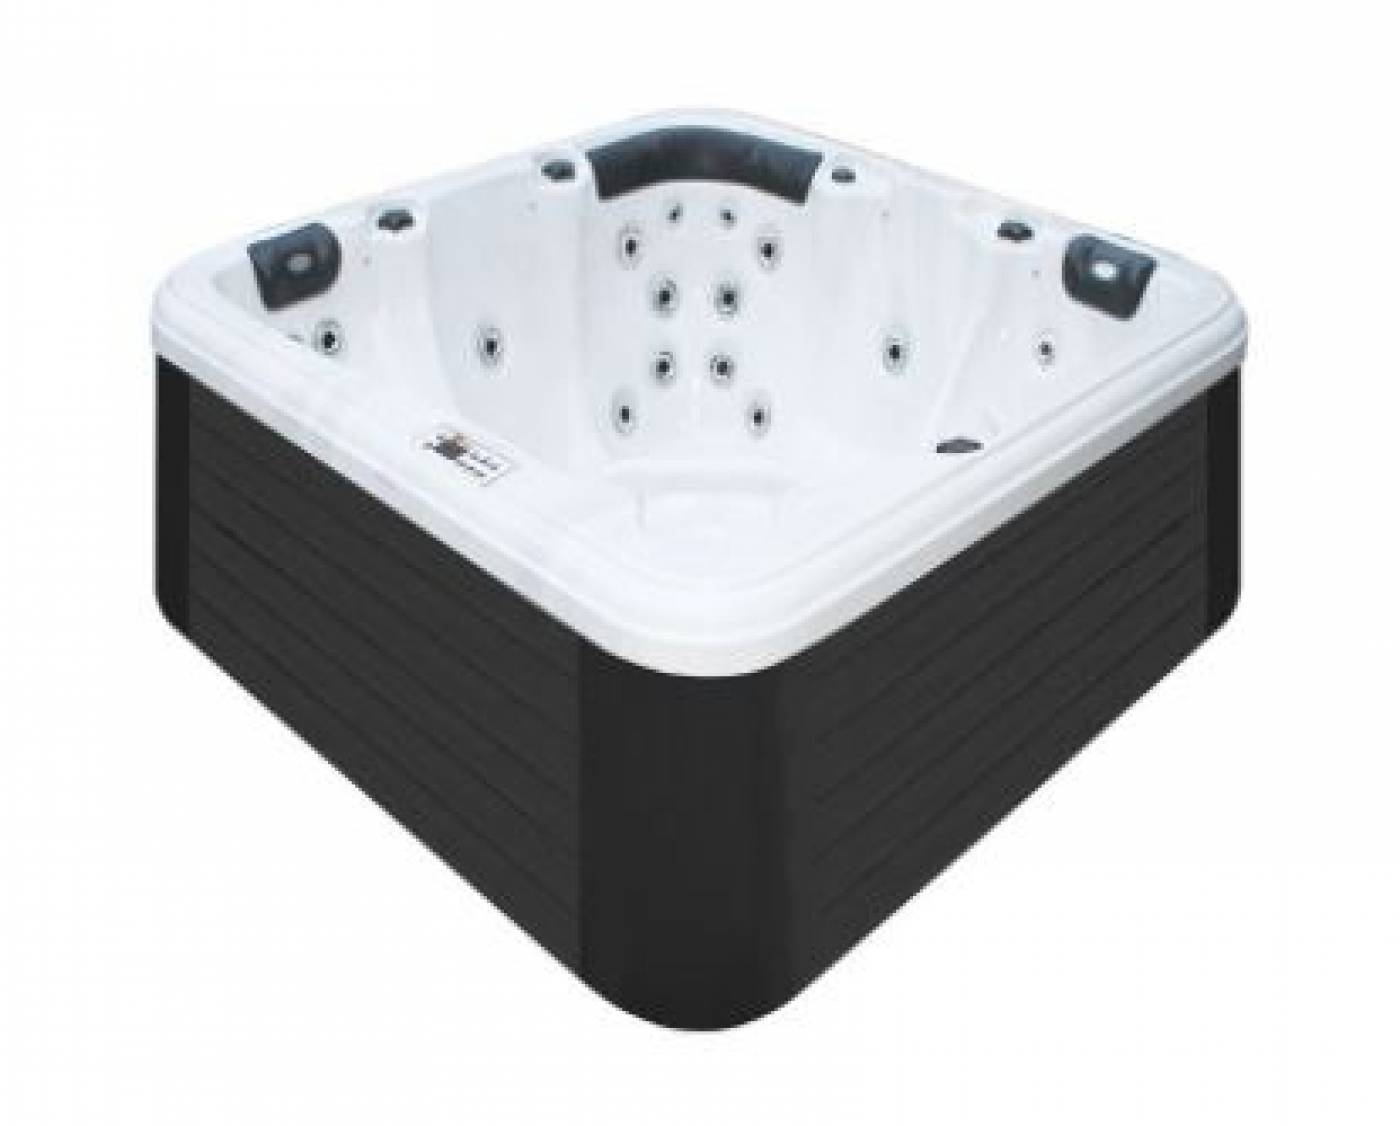 Eurospas suppliers of hot tubs and spas in Spain